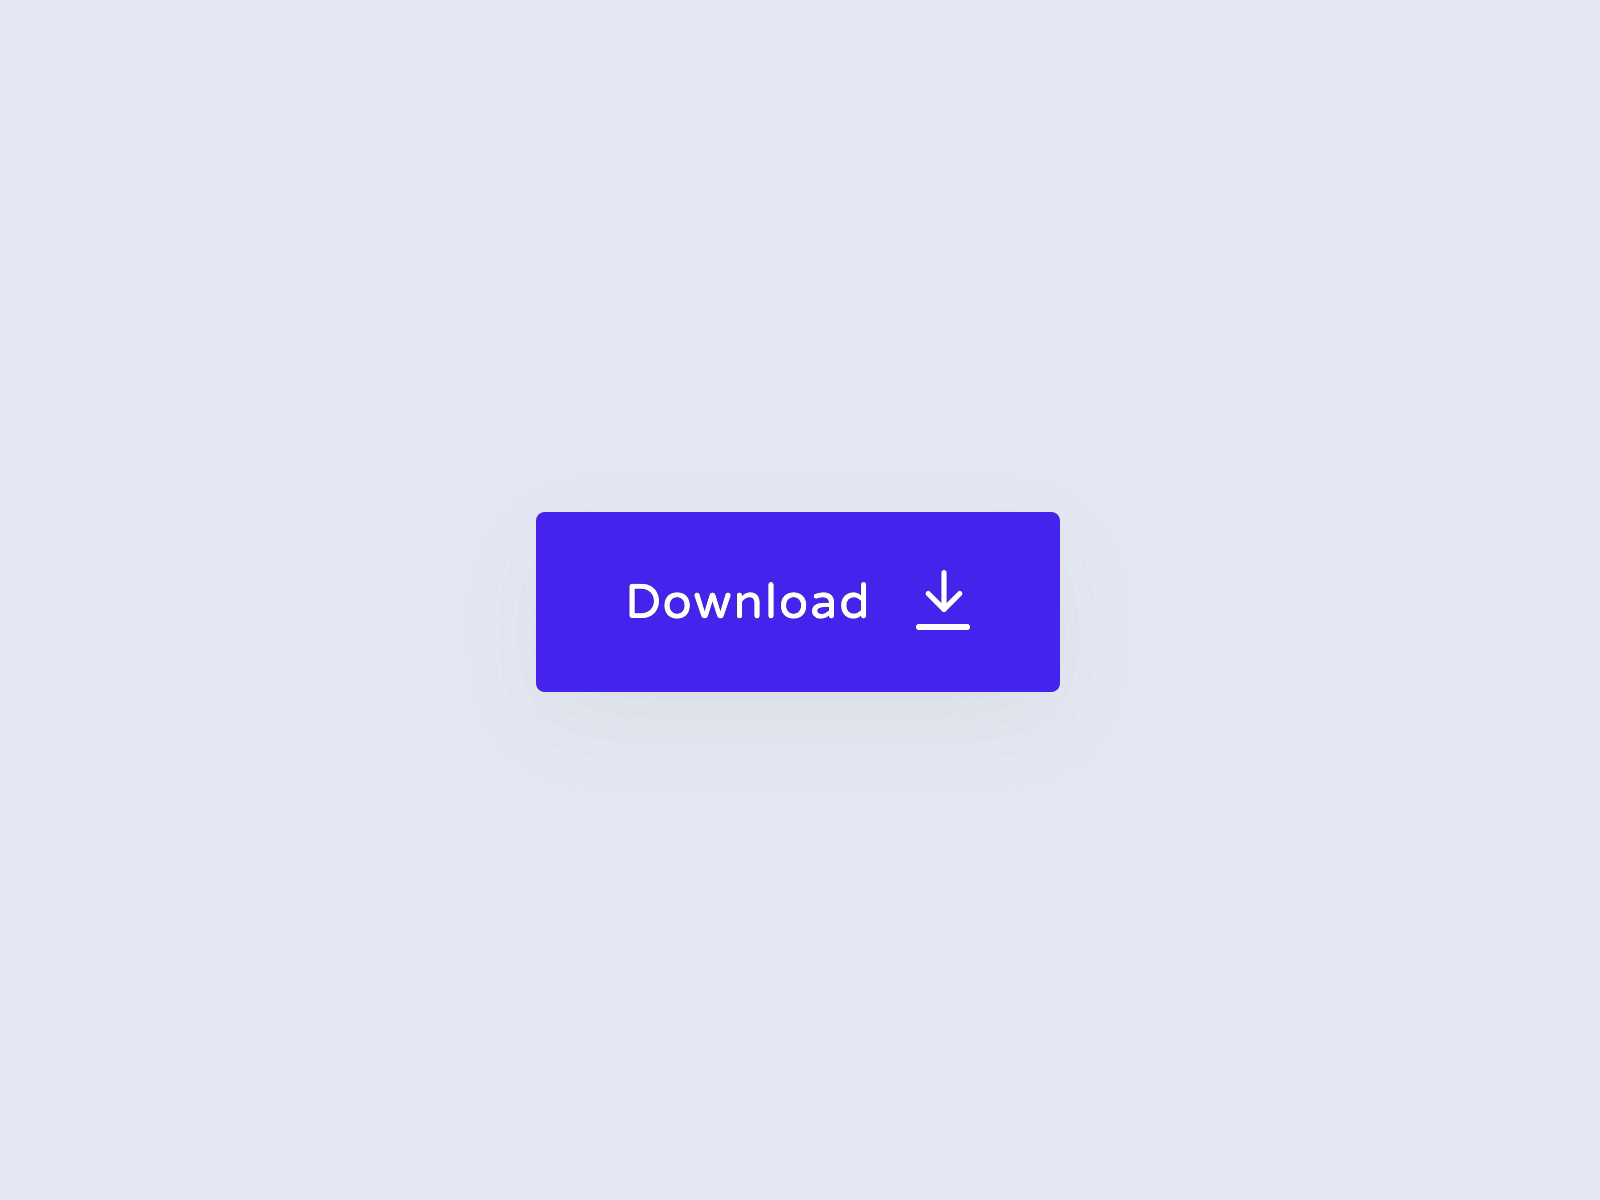 Download button animation - CodePen